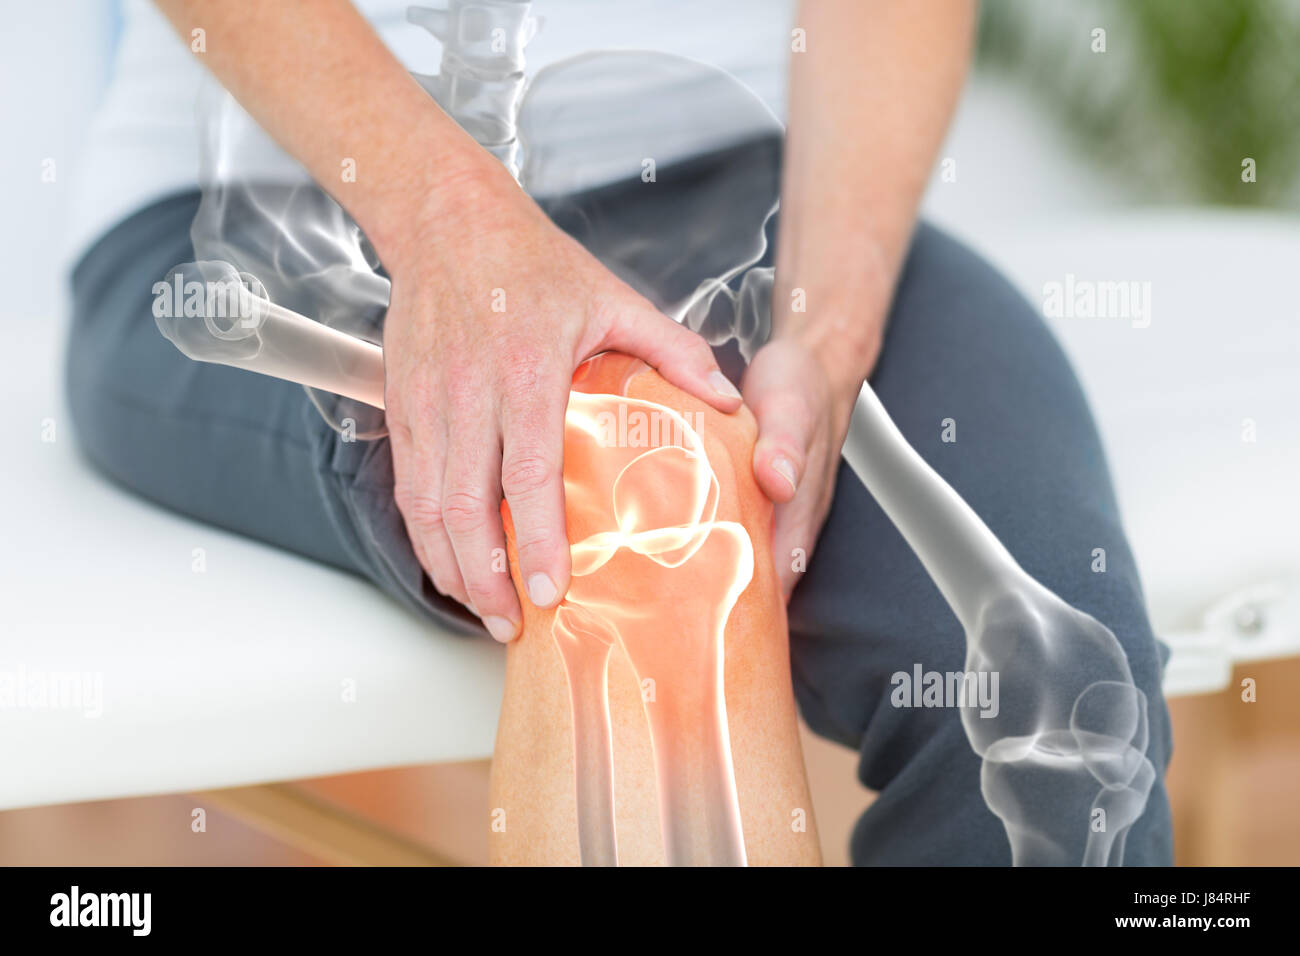 Digitally generated image of man suffering with knee pain Stock Photo